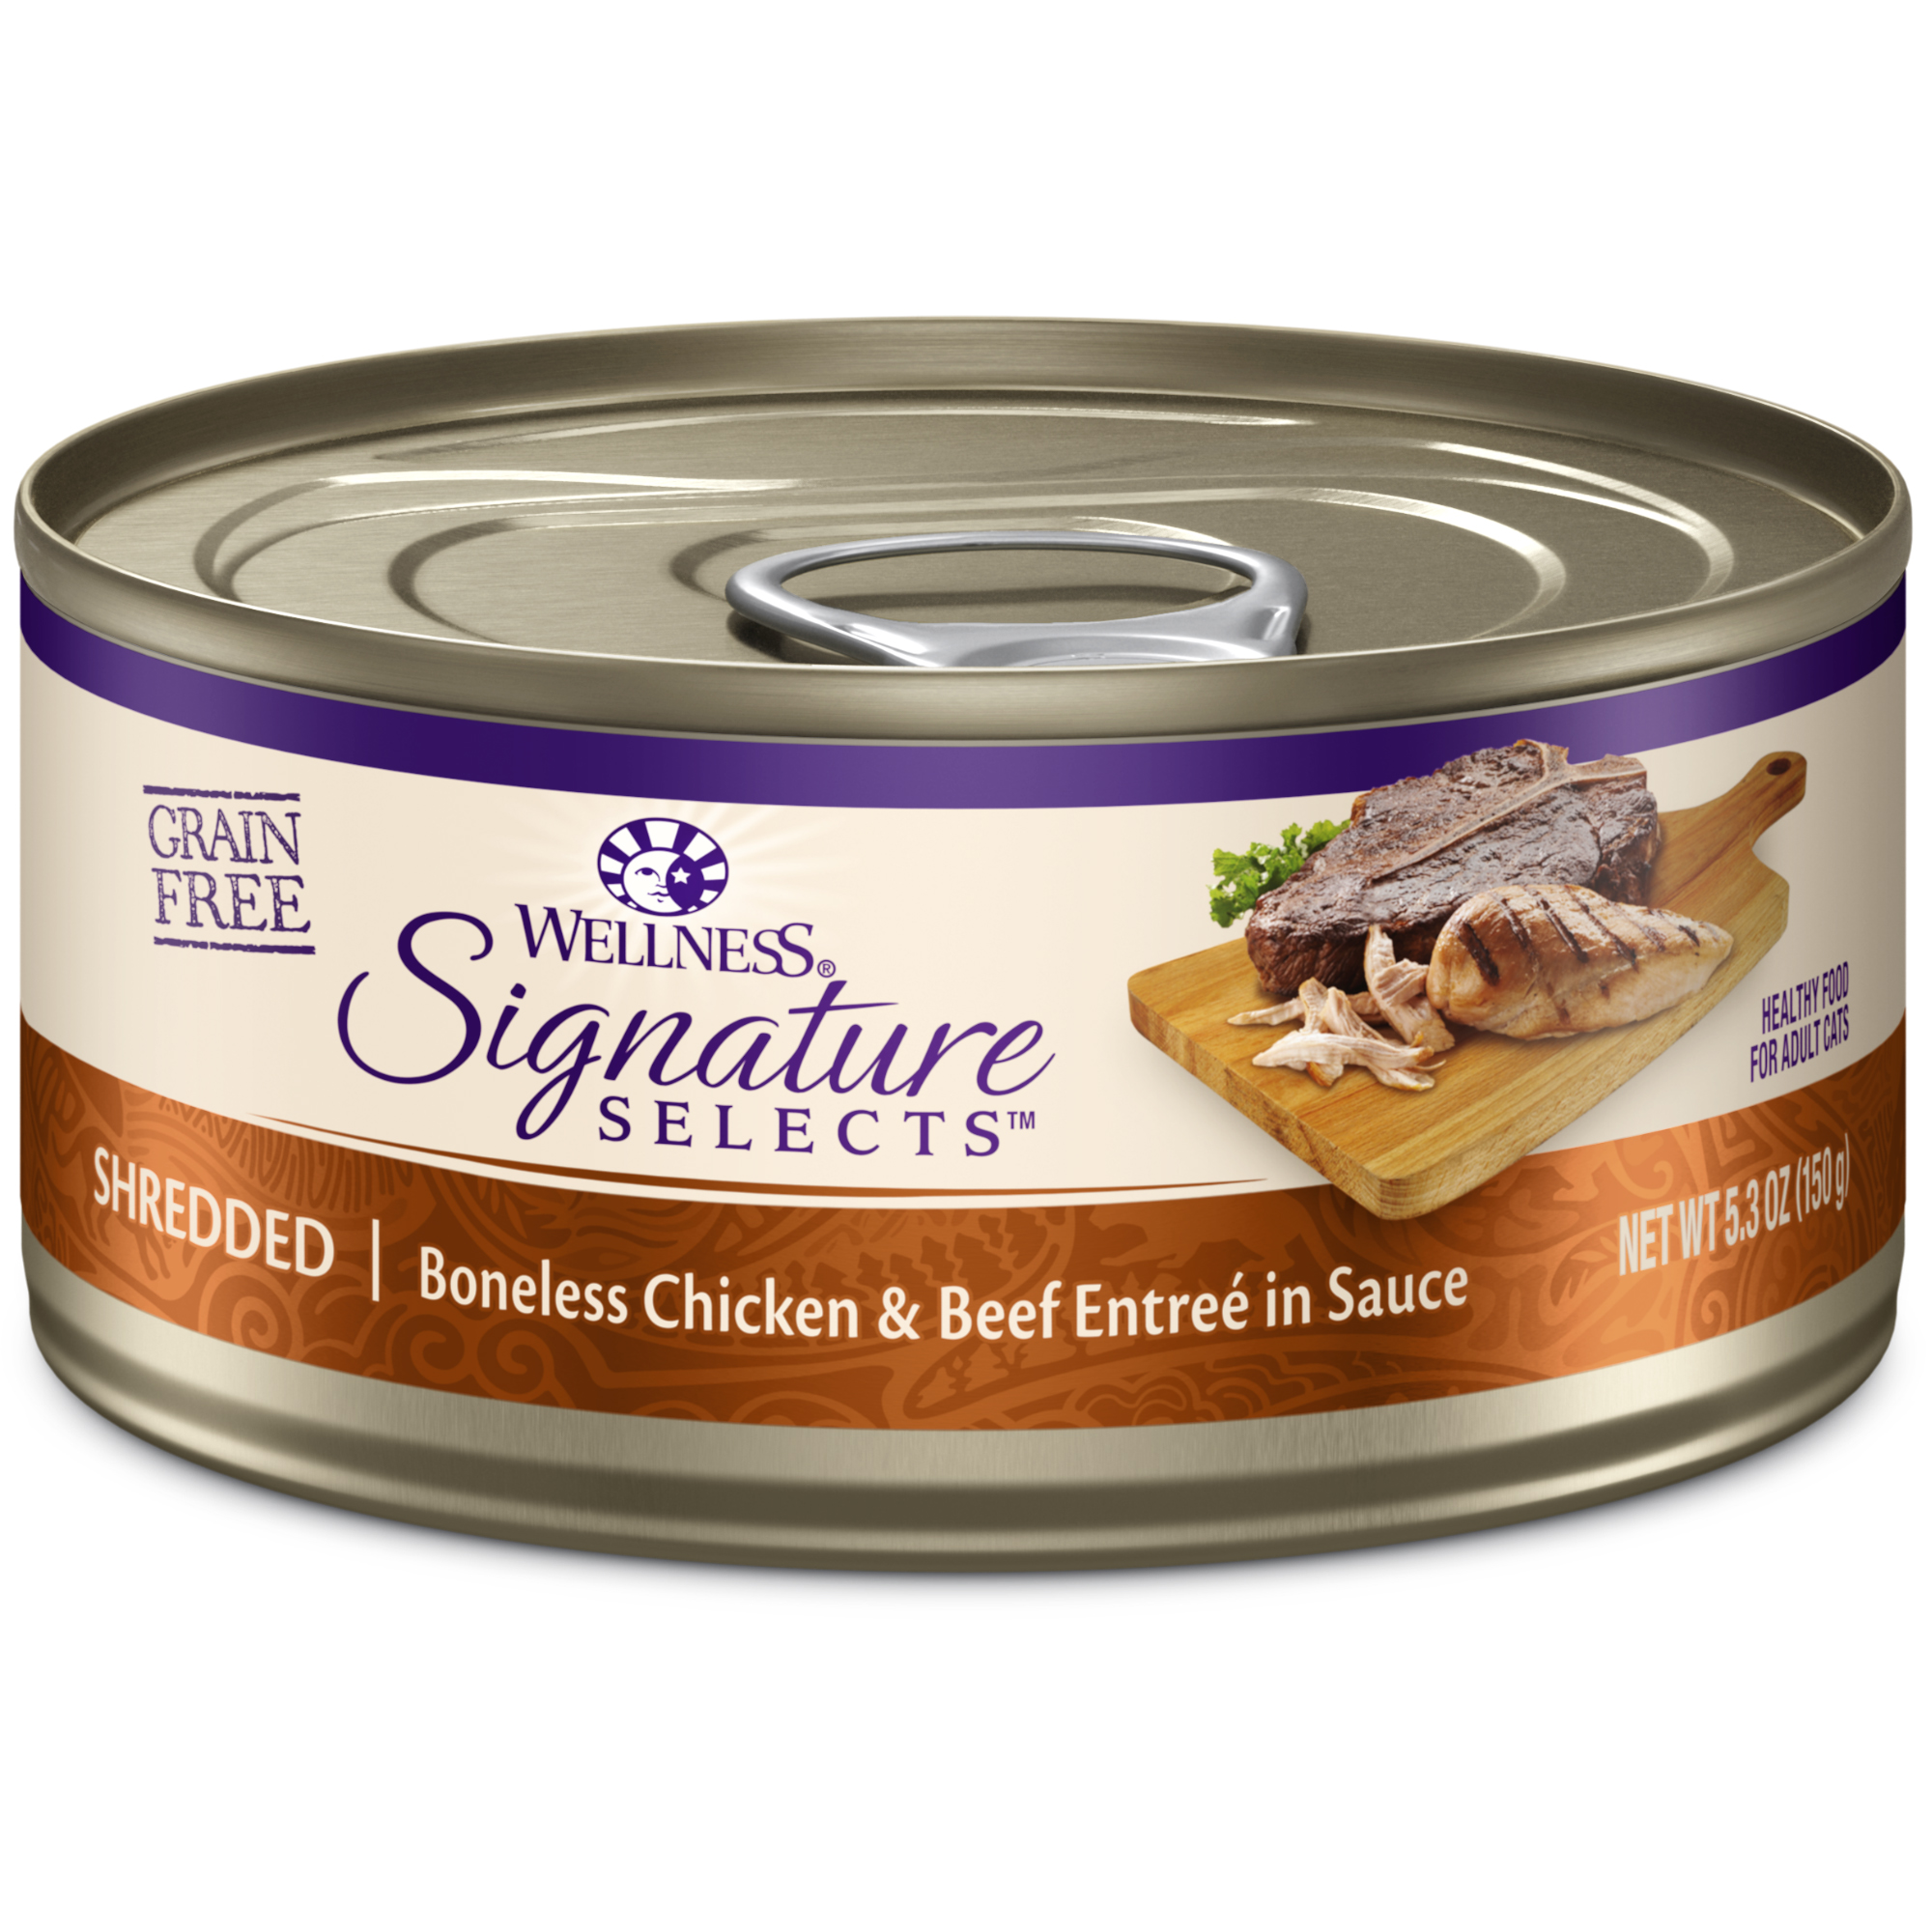 Wellness CORE Signature Selects Wet Cat Food, Shredded Chicken & Beef Entree in Sauce, 5.3oz (Pack of 12) - image 1 of 10